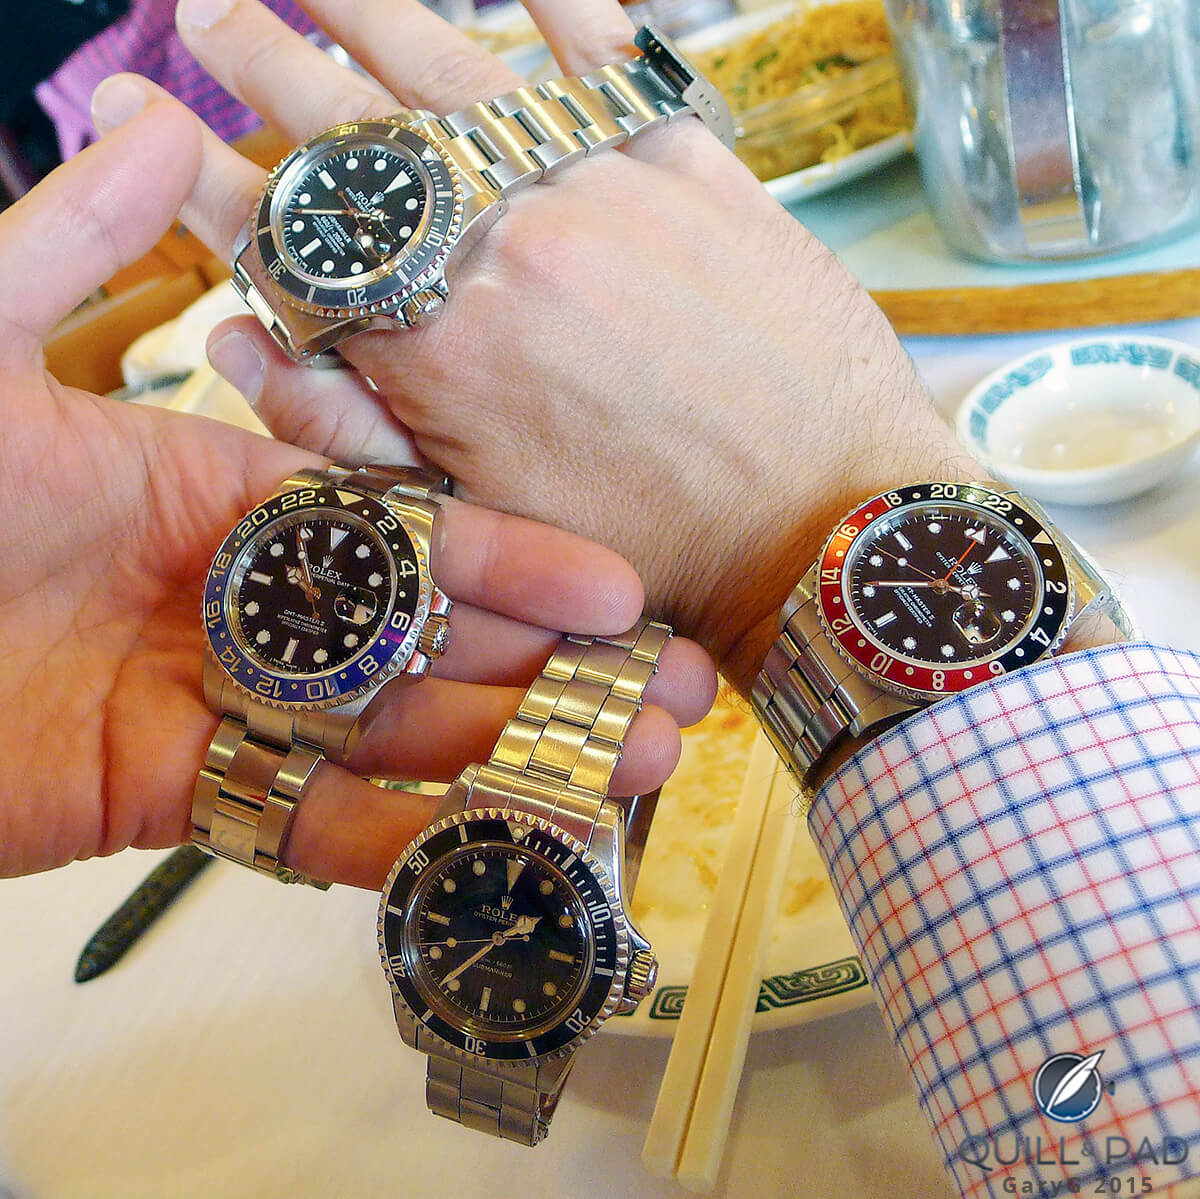 Some Friends’ Rolexes as Seen at a Recent Group Lunch